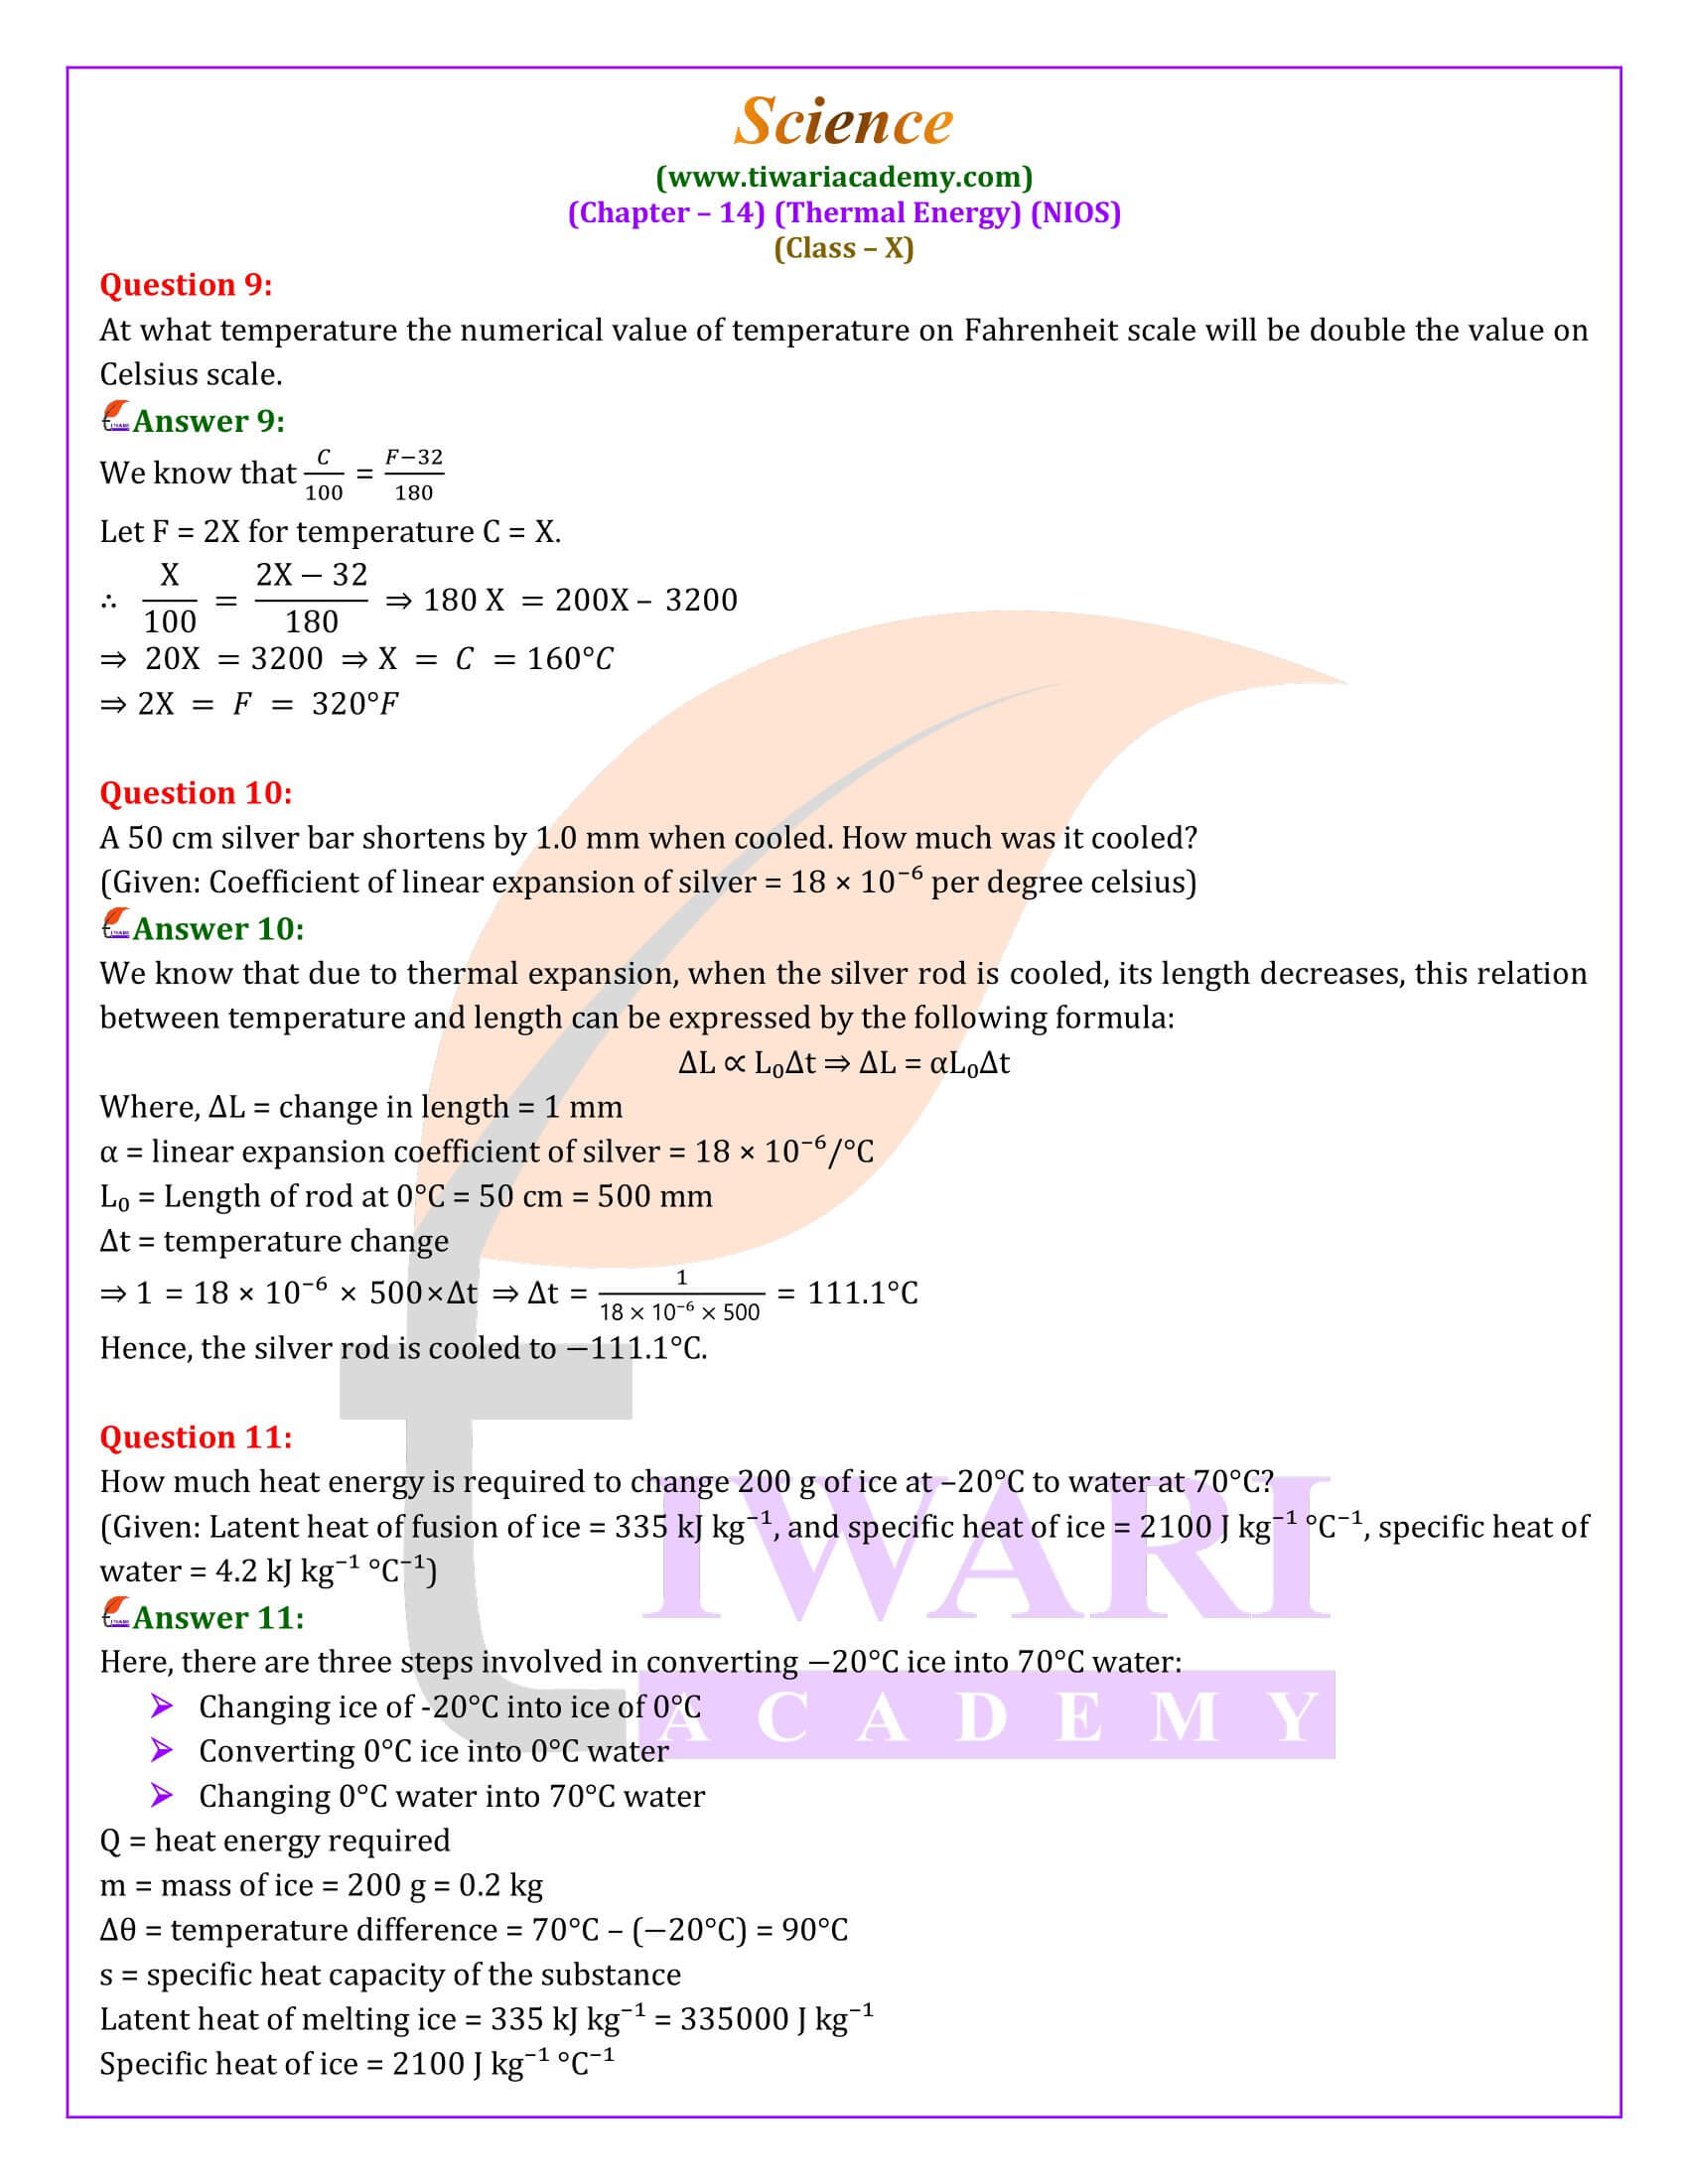 NIOS Class 10 Science Chapter 14 Thermal Energy guide